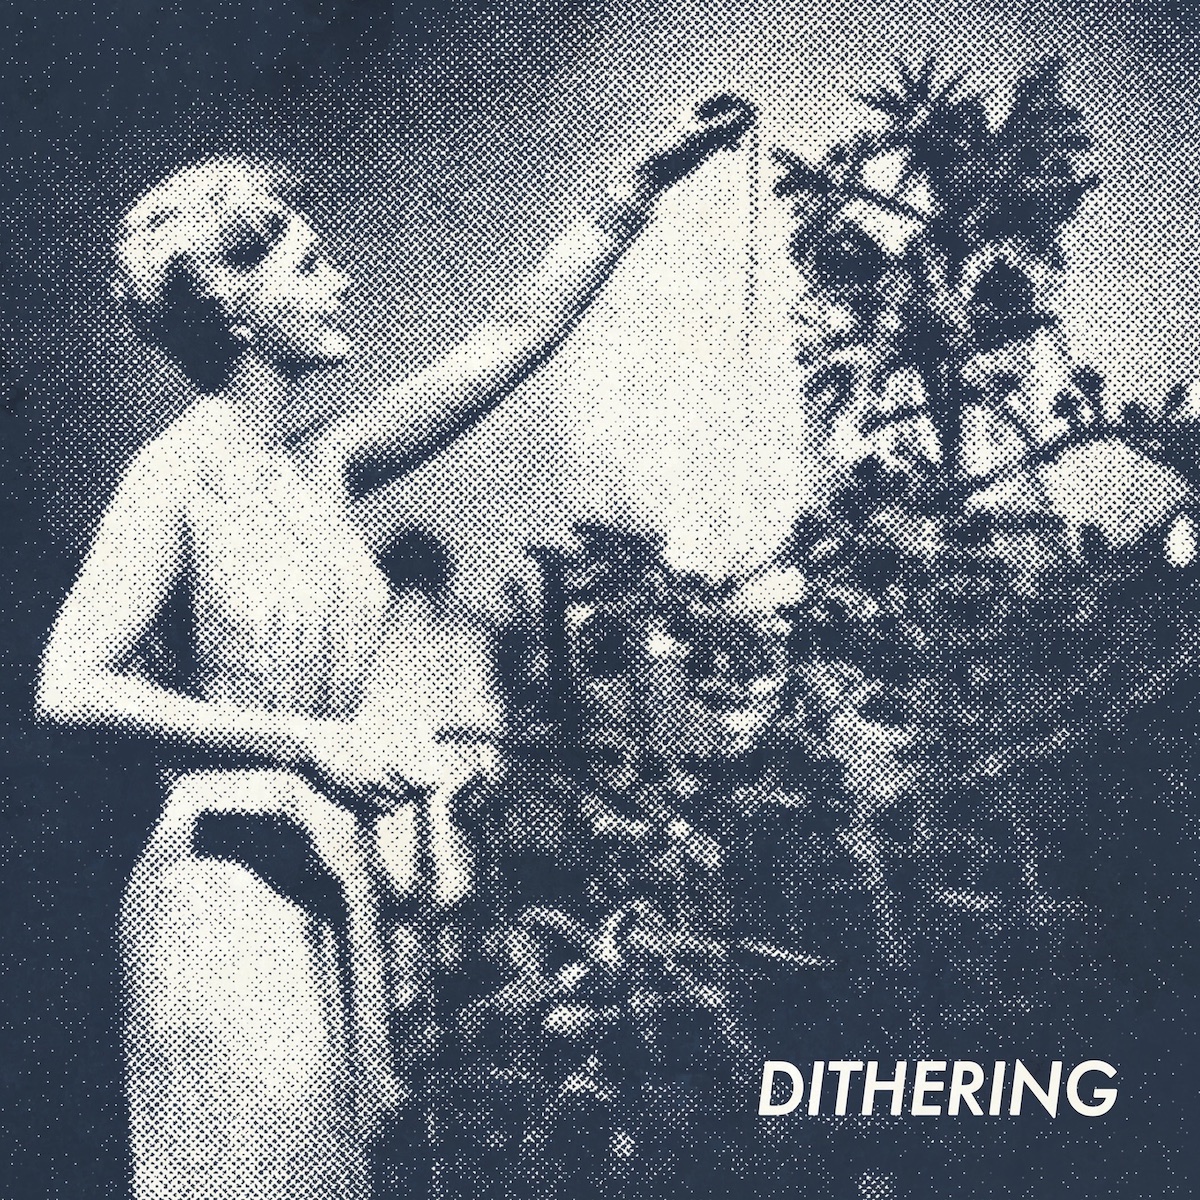 December 2020 cover art for Dithering, featuring a woman cheerfully trimming a Christmas tree.